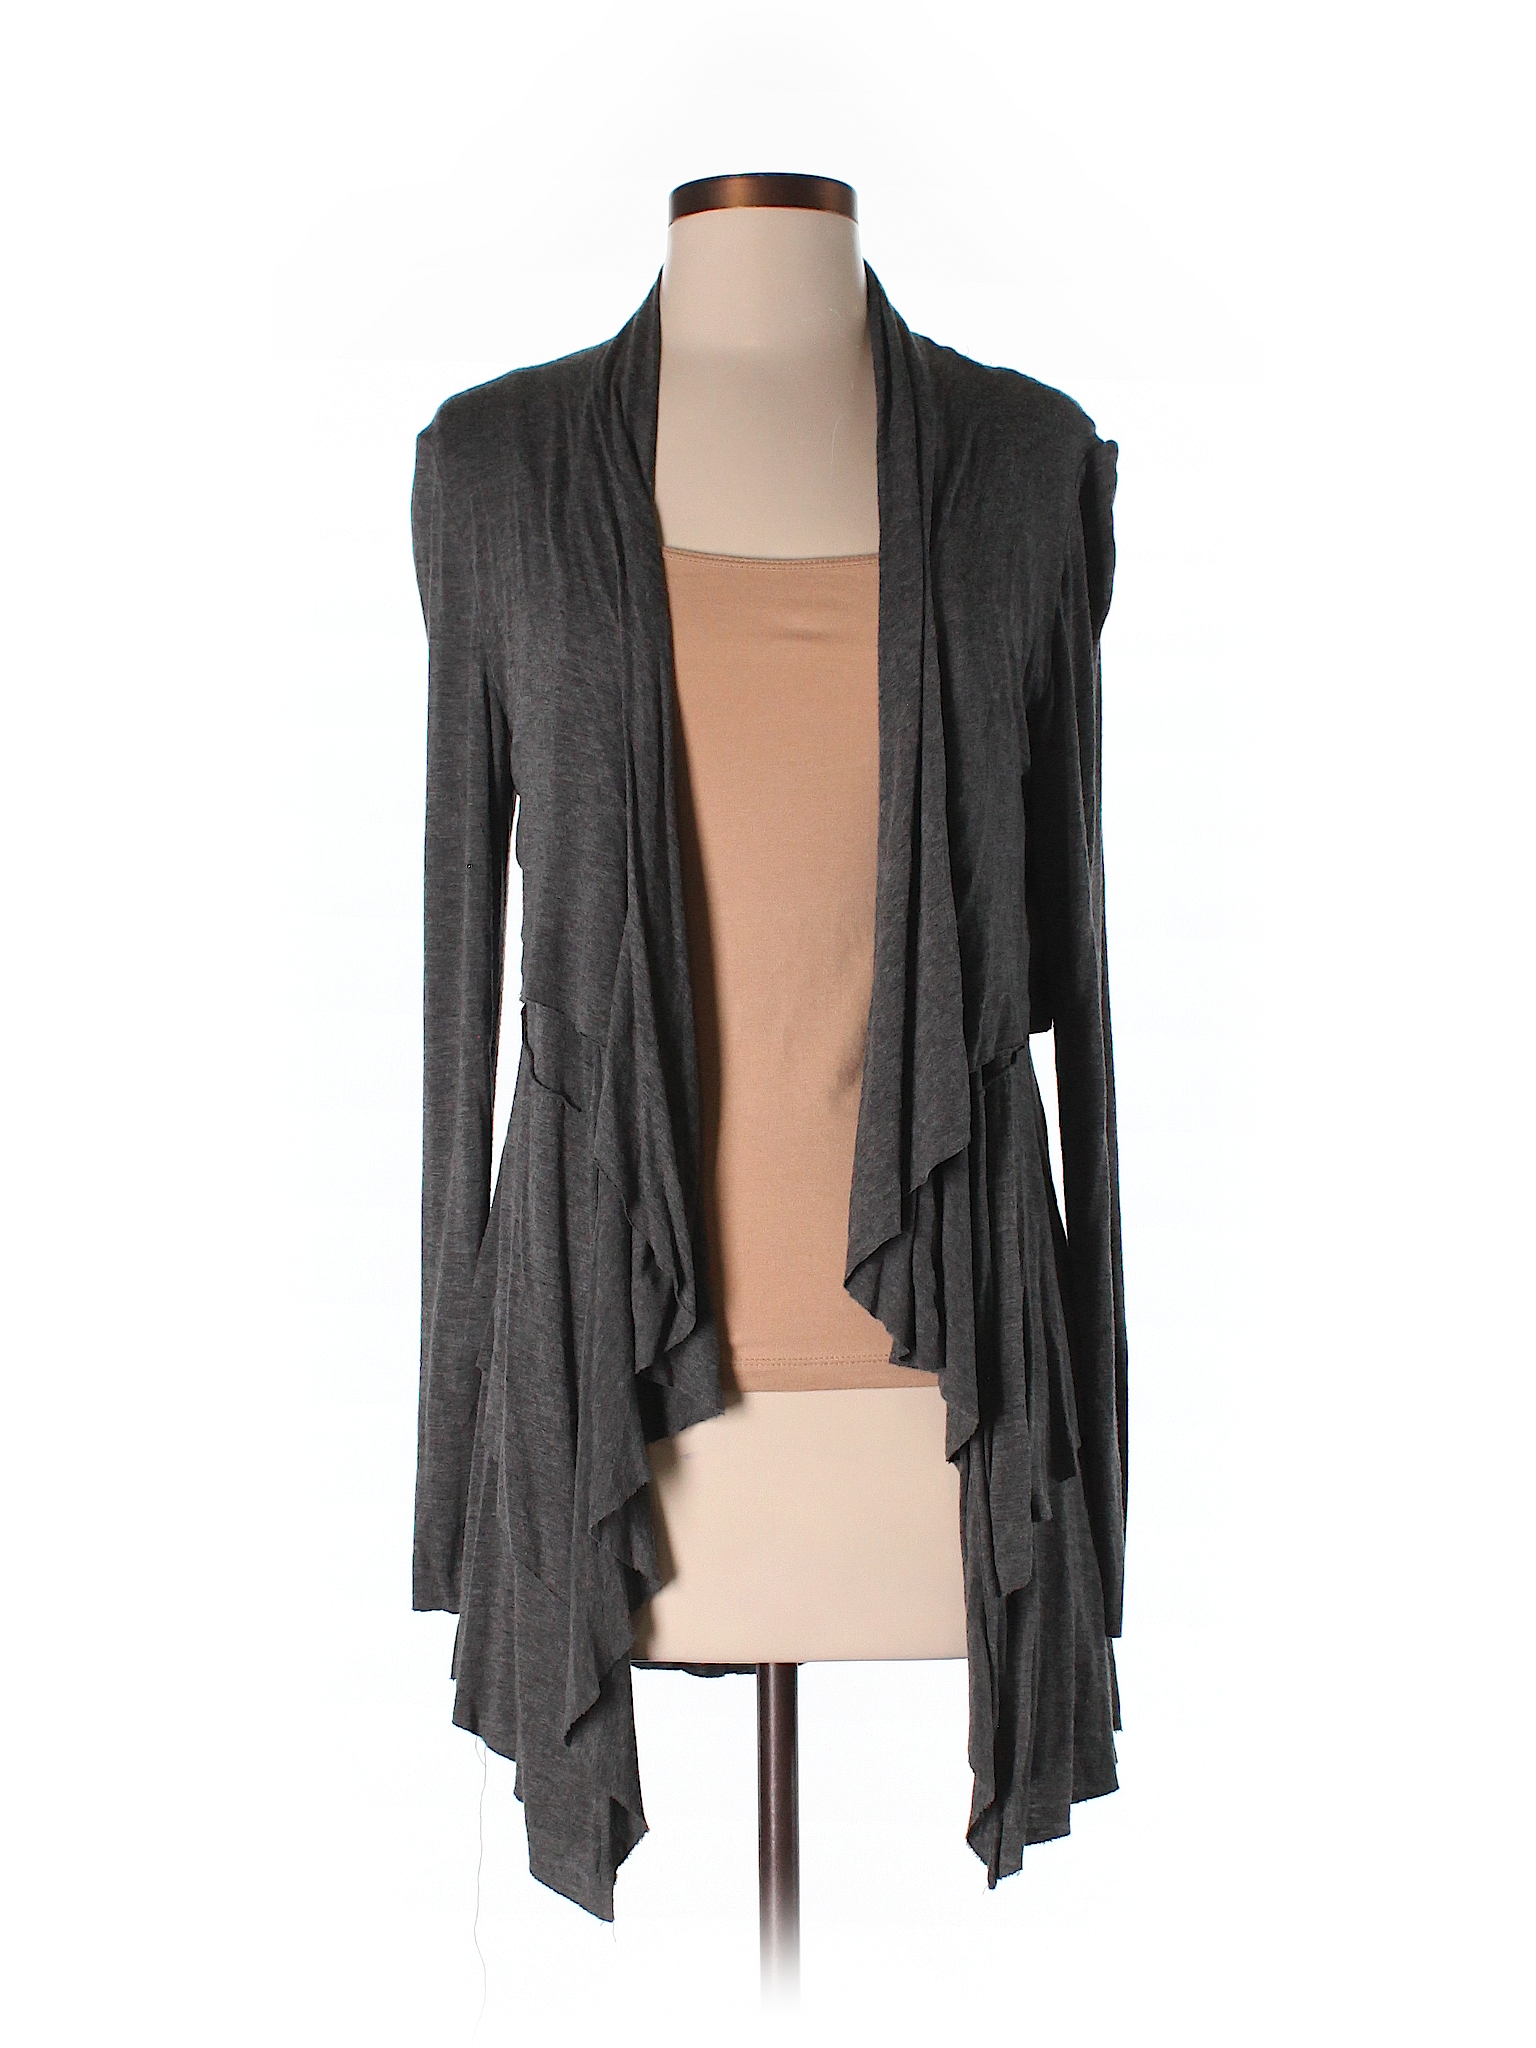 Cha Cha Vente Solid Gray Cardigan Size S - 91% off | thredUP